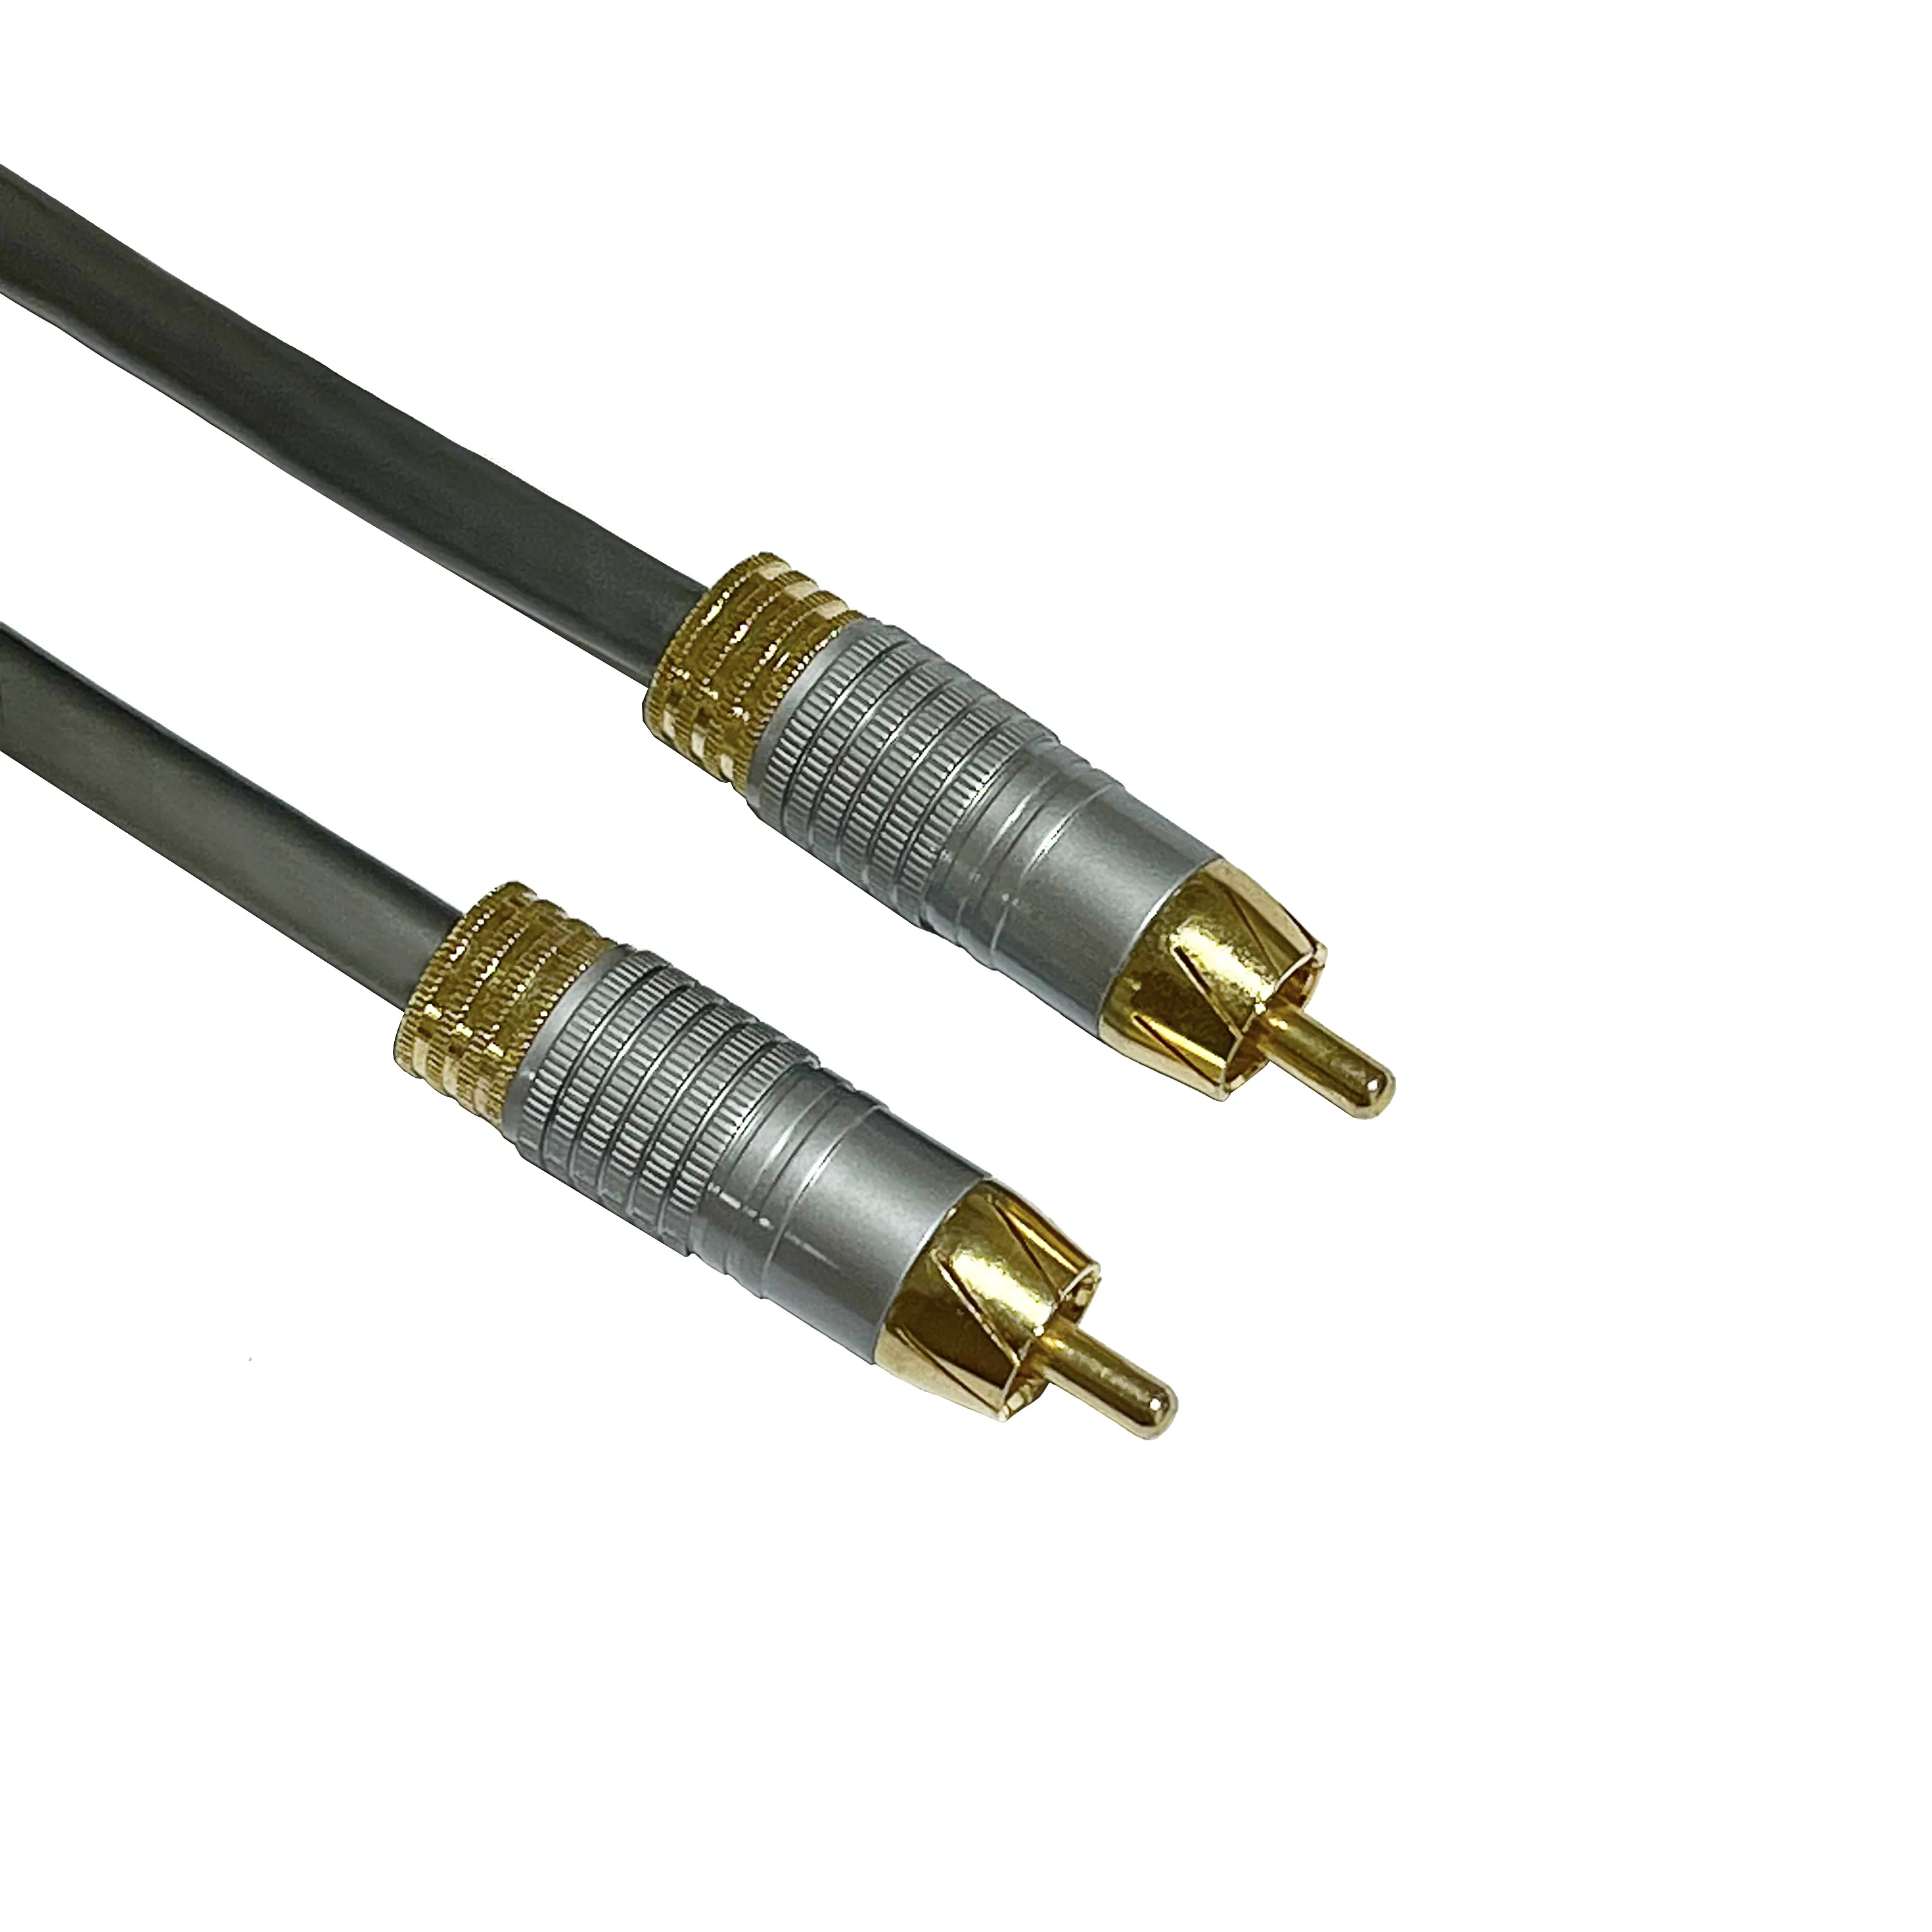 Gold Plated Audio Cable Stereo Plug 1M For Games DVD Set-top Box And TV 3.5mm RCA Cable